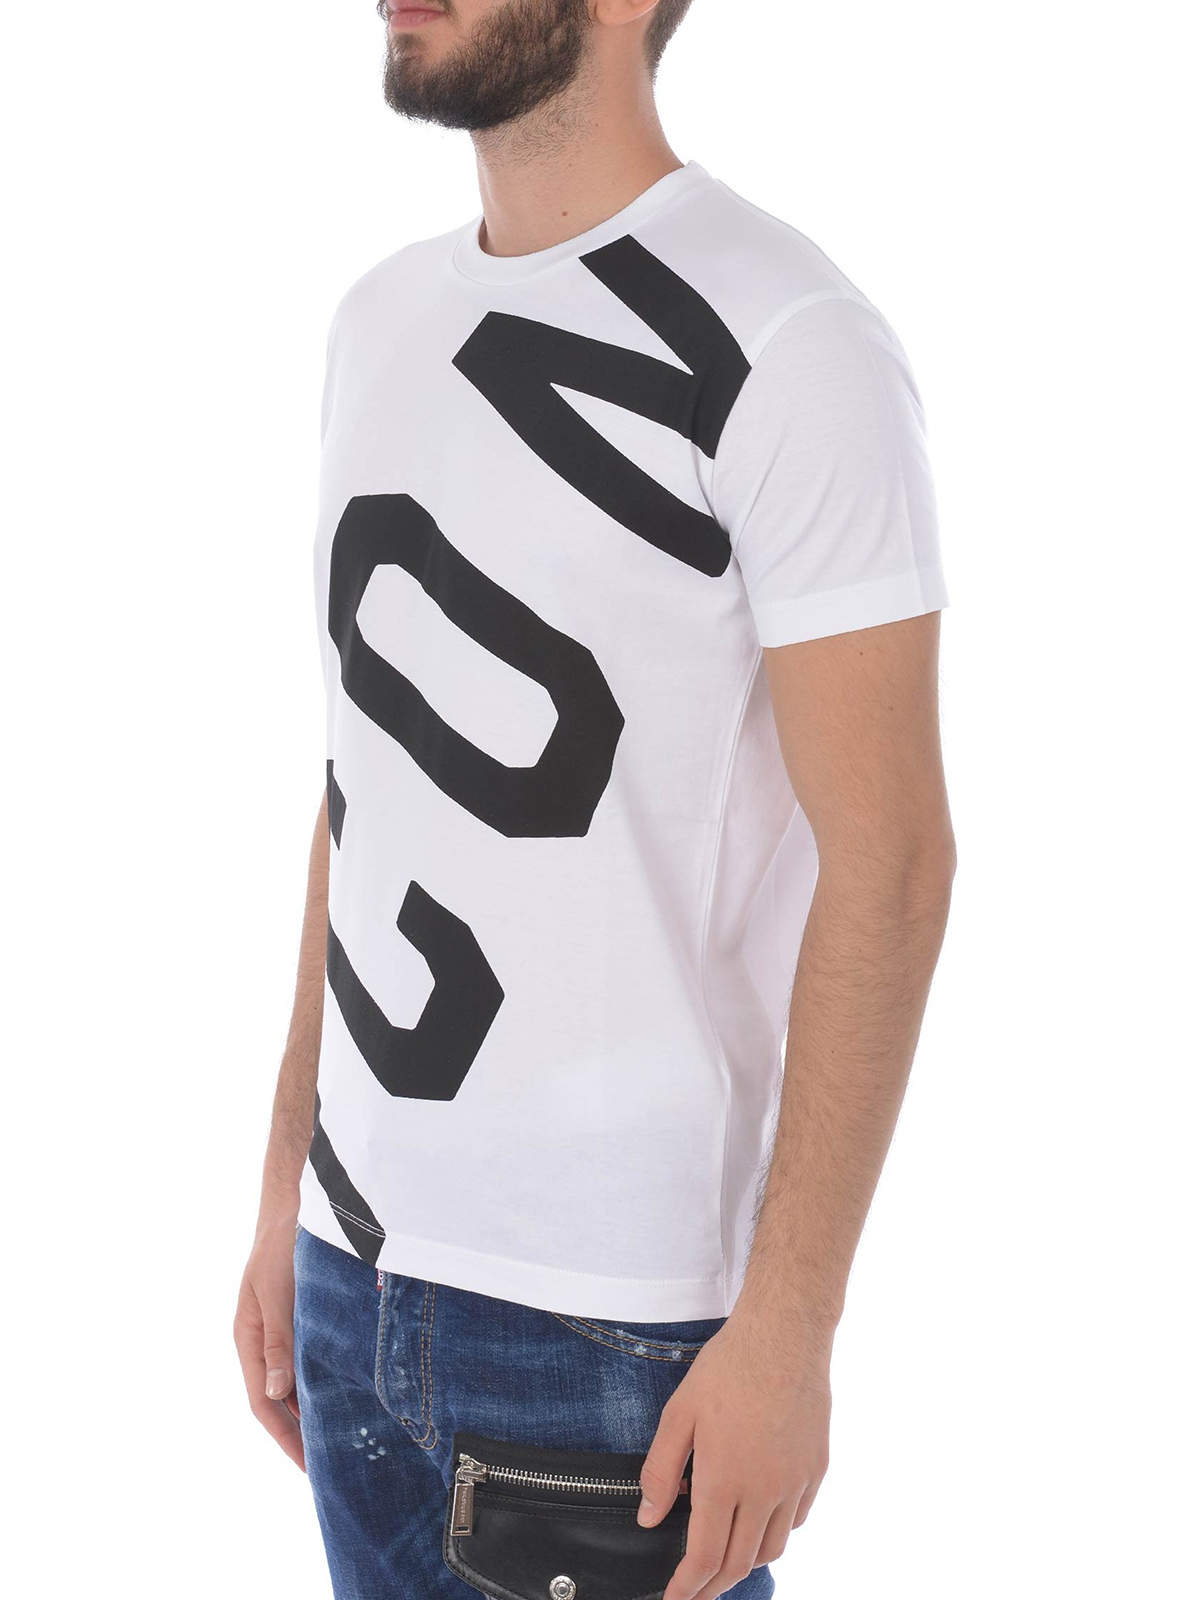 dsquared2 icon t shirt